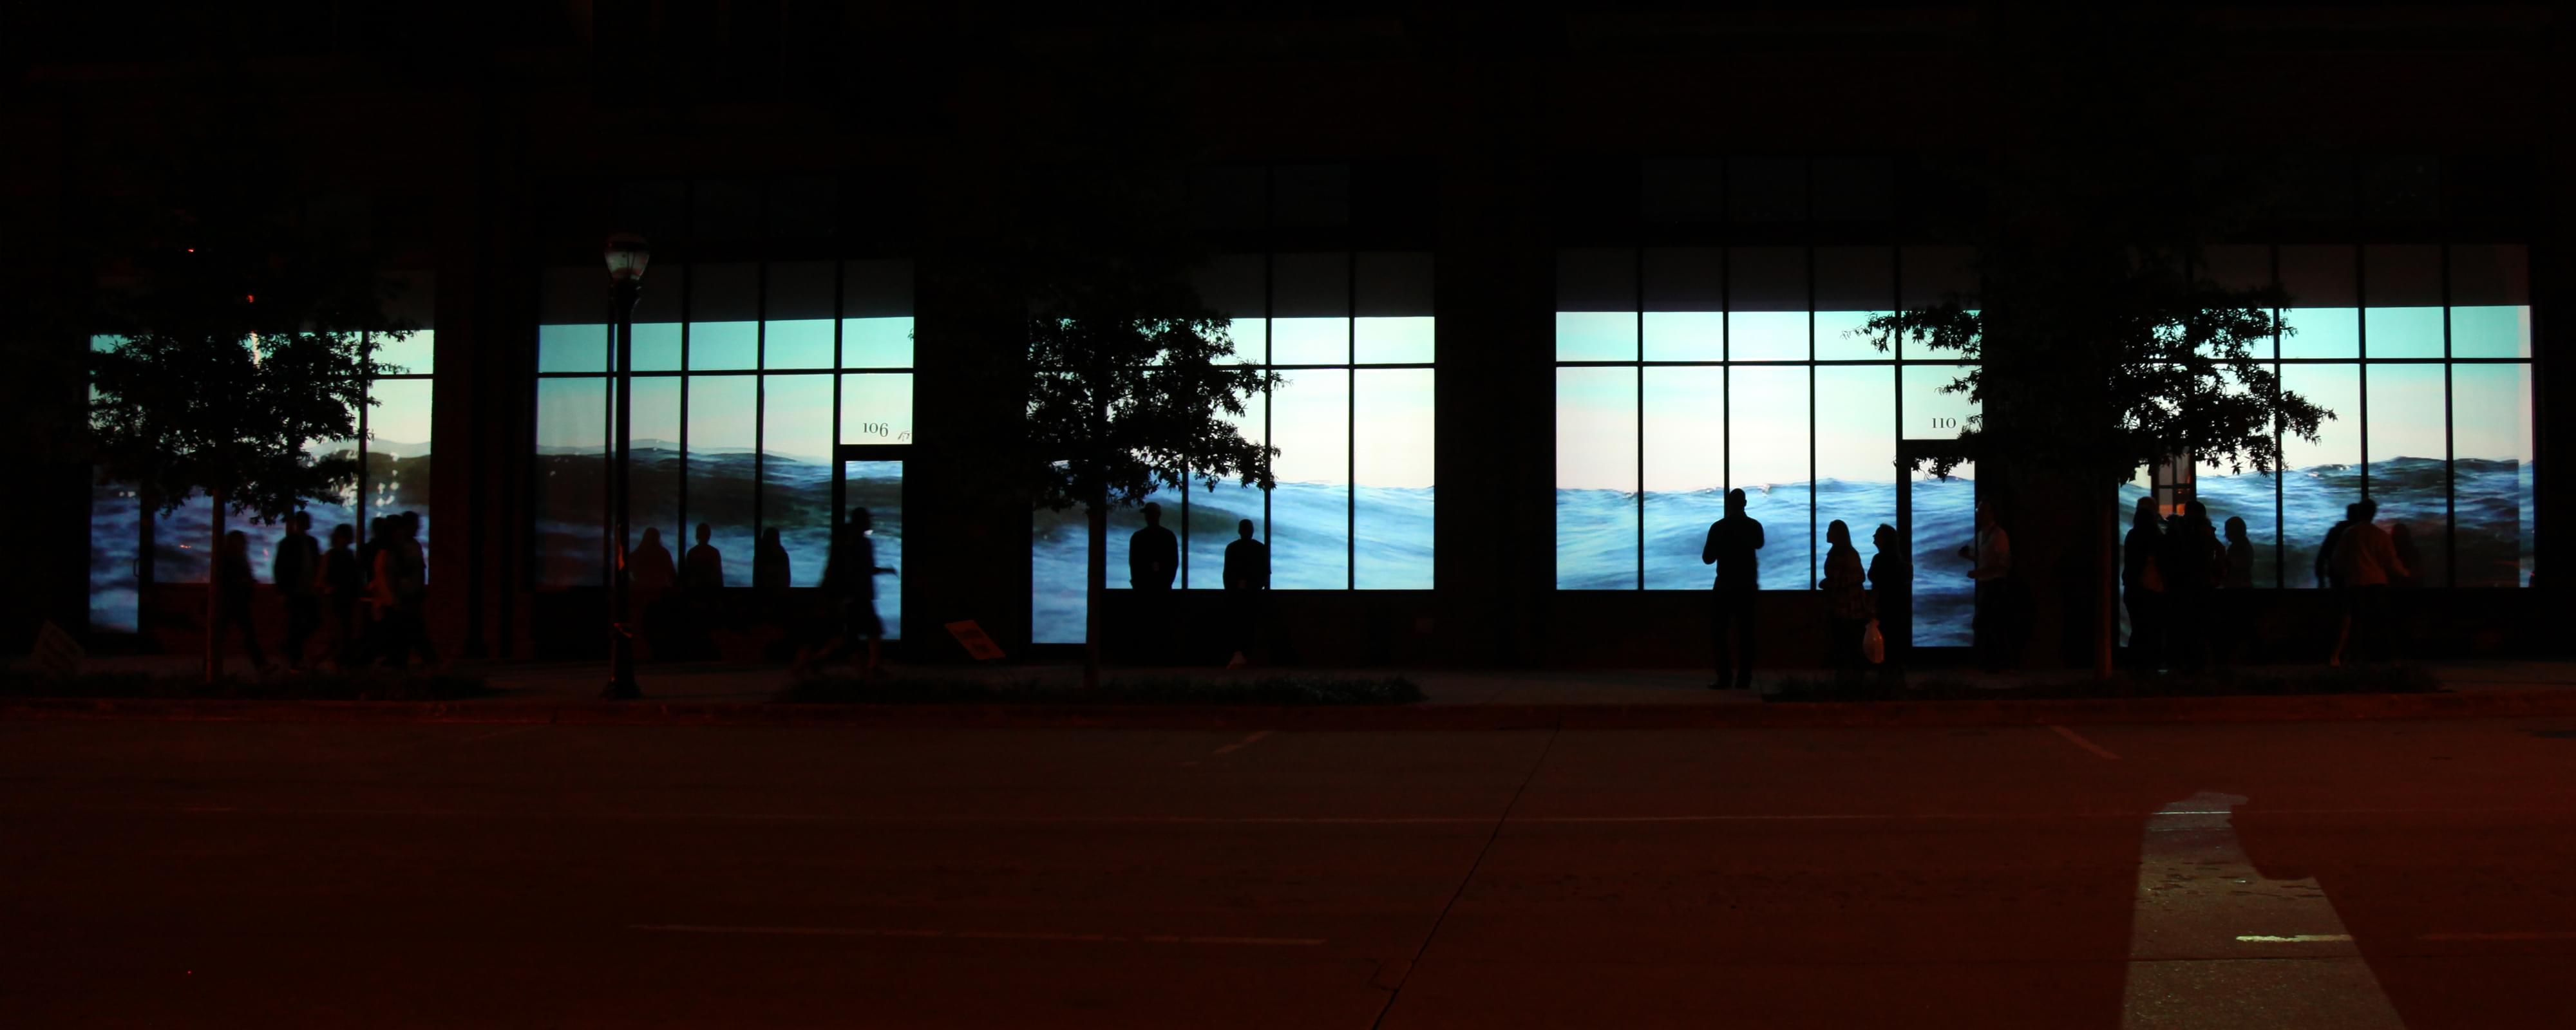 Nightime photograph of a several storefronts with a projection of water (from the sea) in their windows. Water level is contiguous across many storefronts. Inside the storefronts are silhouettes of people interacting with the video installation.